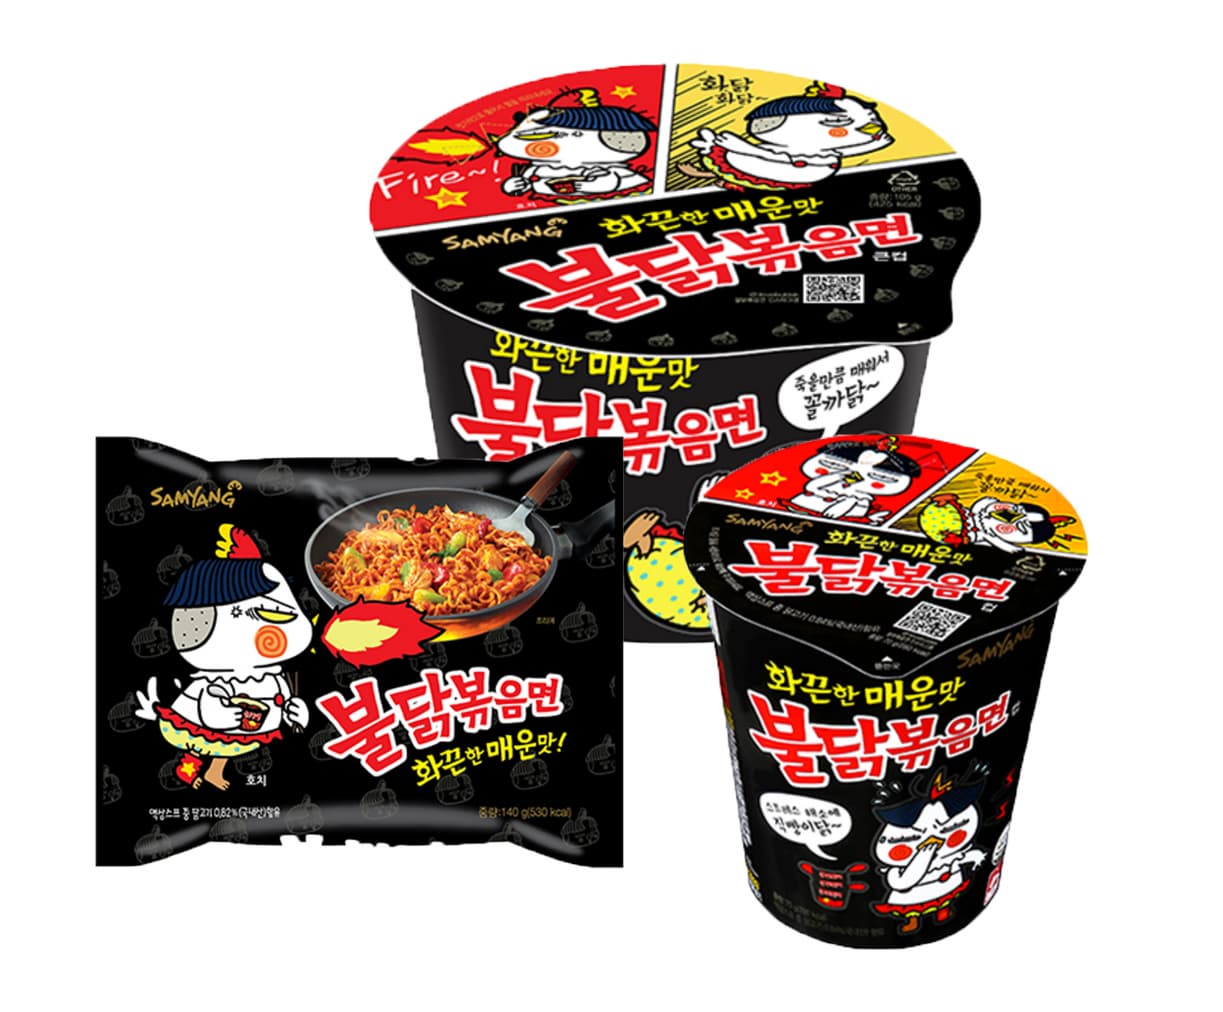 Samyang Spicy chicken fried noodle_ Fire chicken noodle_Rame